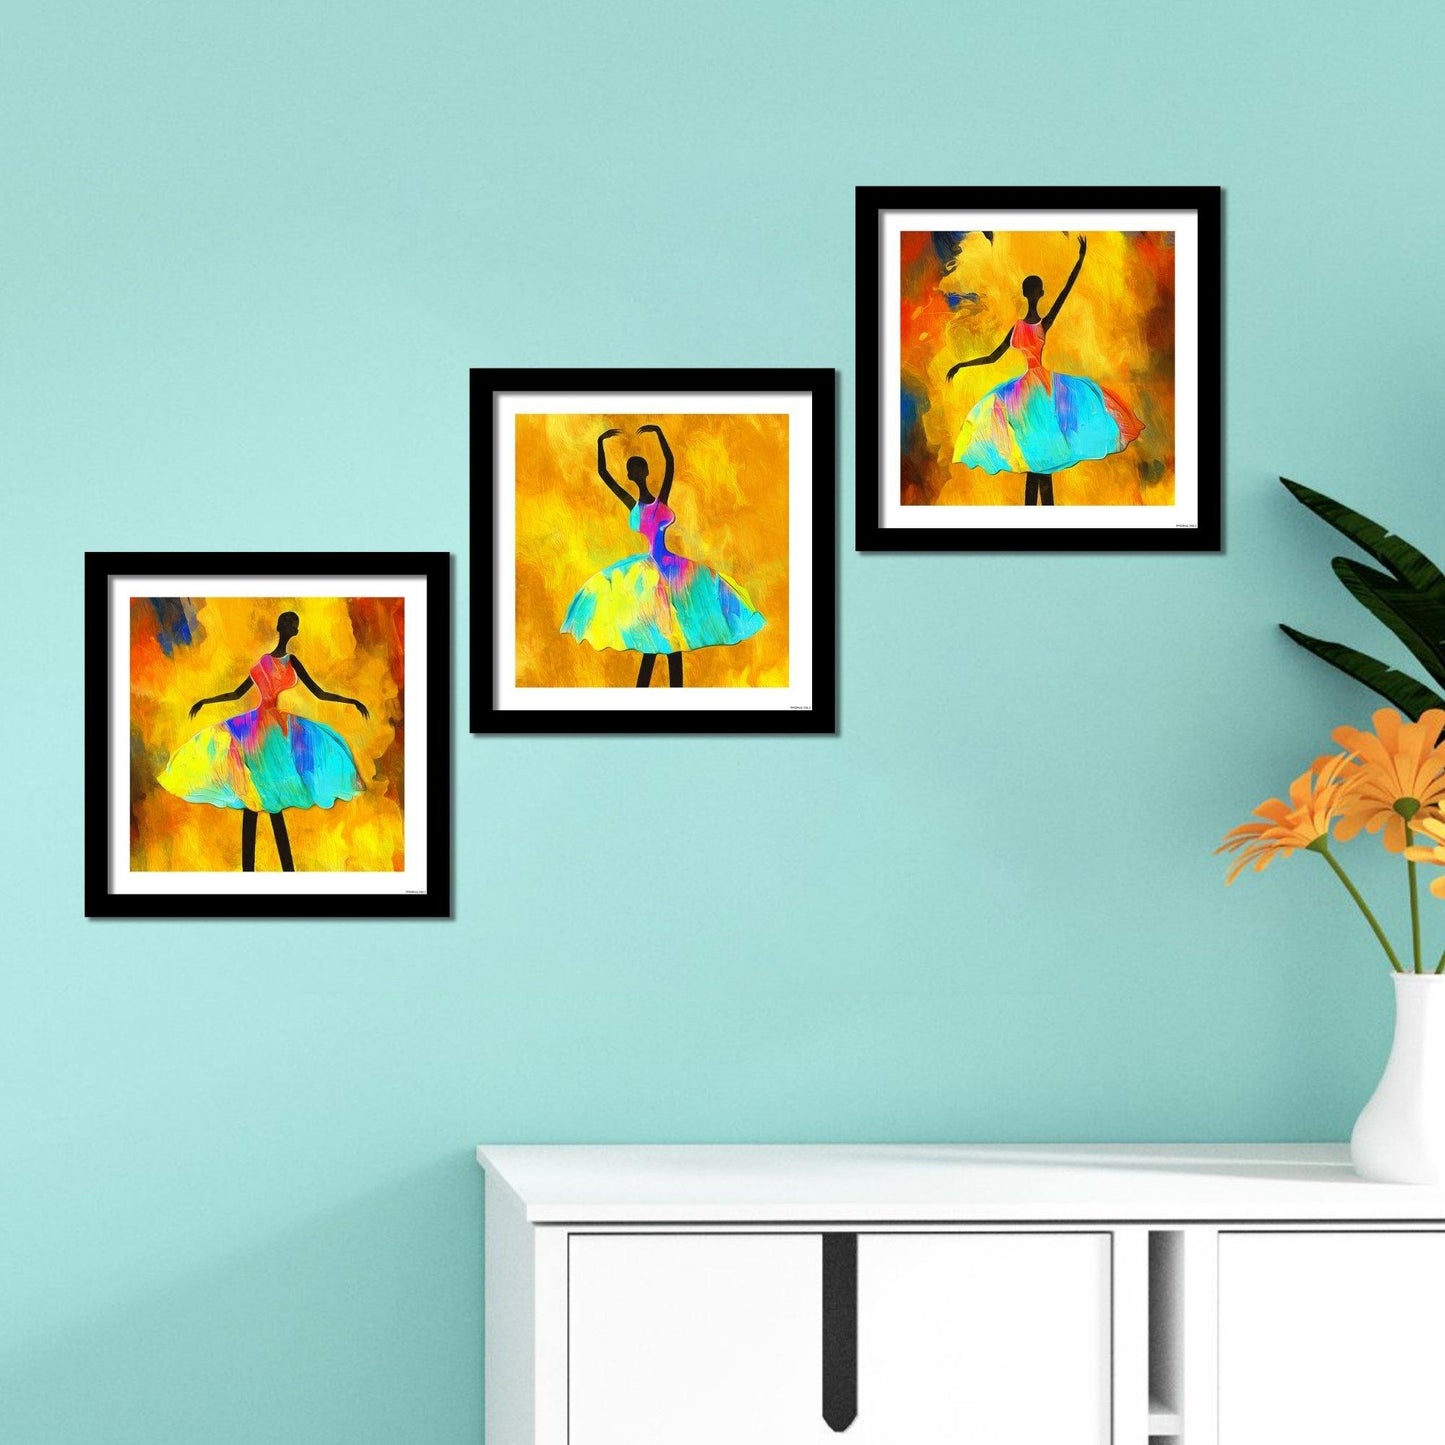 3 Pieces Quality Wall Frame of African Girl Ballerina Dancing